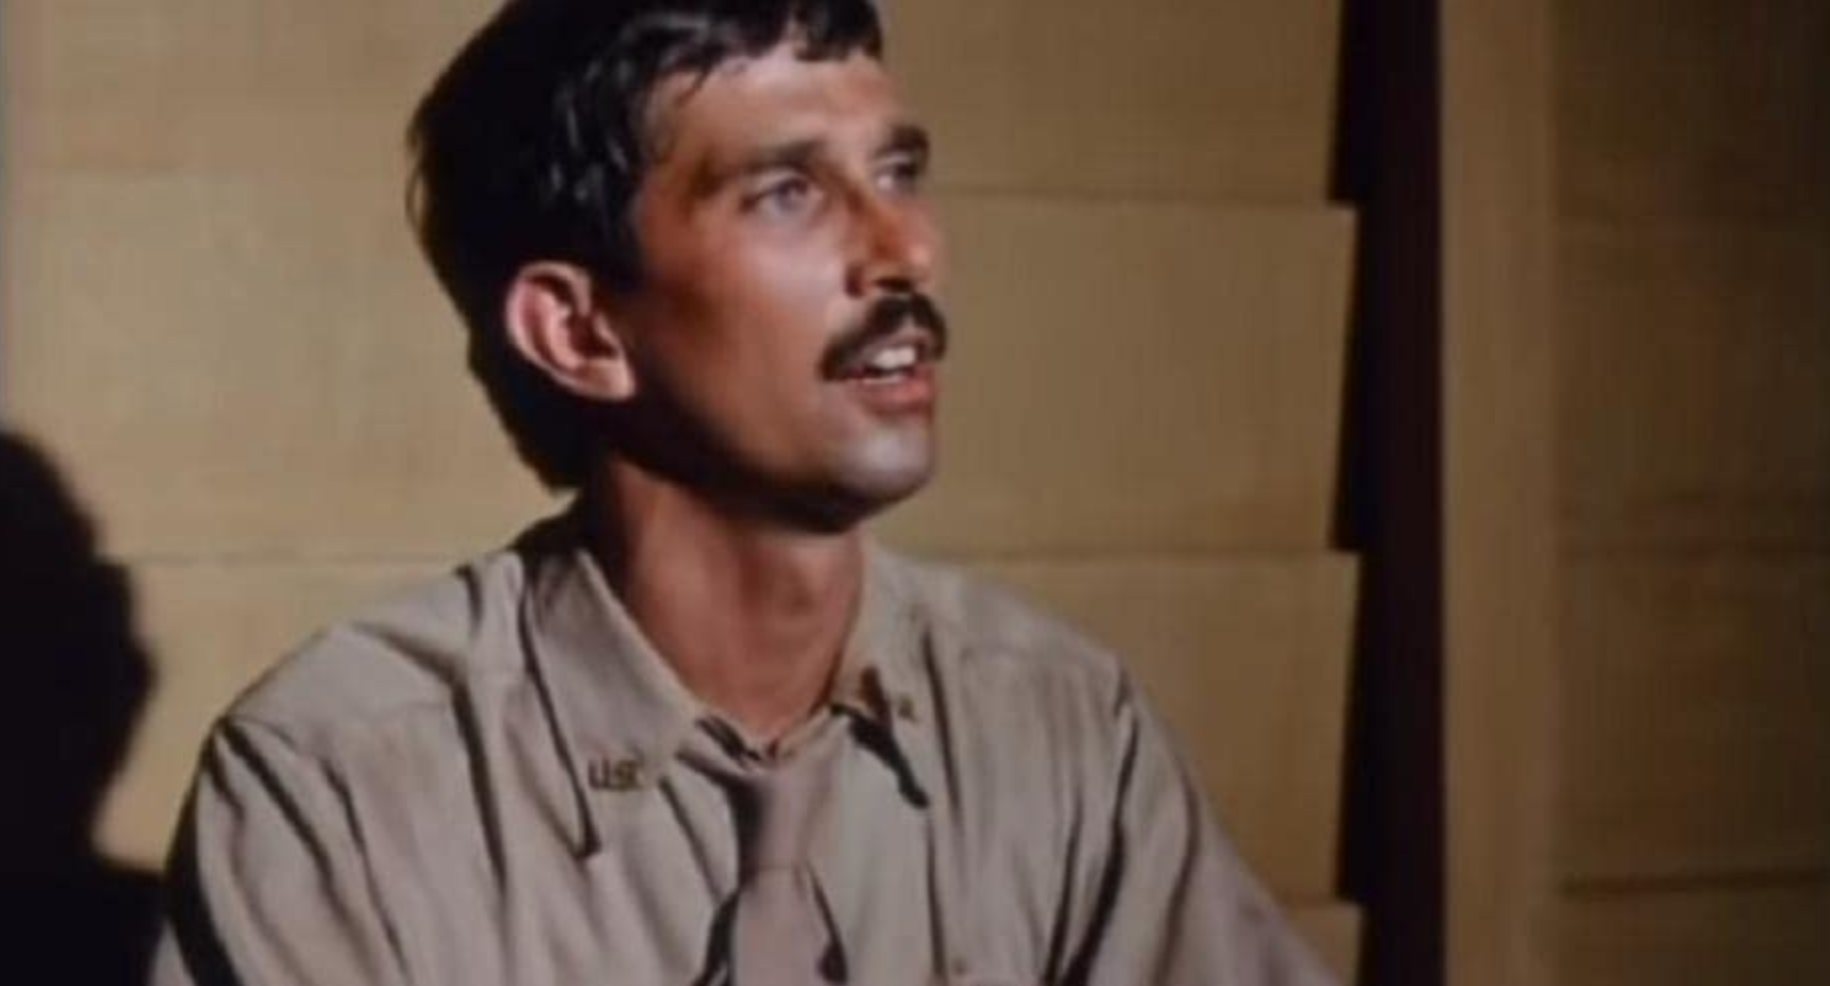 John Peterson, while living in Senegal after finishing his Peace Corps service, appeared in the 1988 Senegalese film u0022Camp de Thiyaroe.u0022 He played an American soldier who was briefly detained by West African forces.